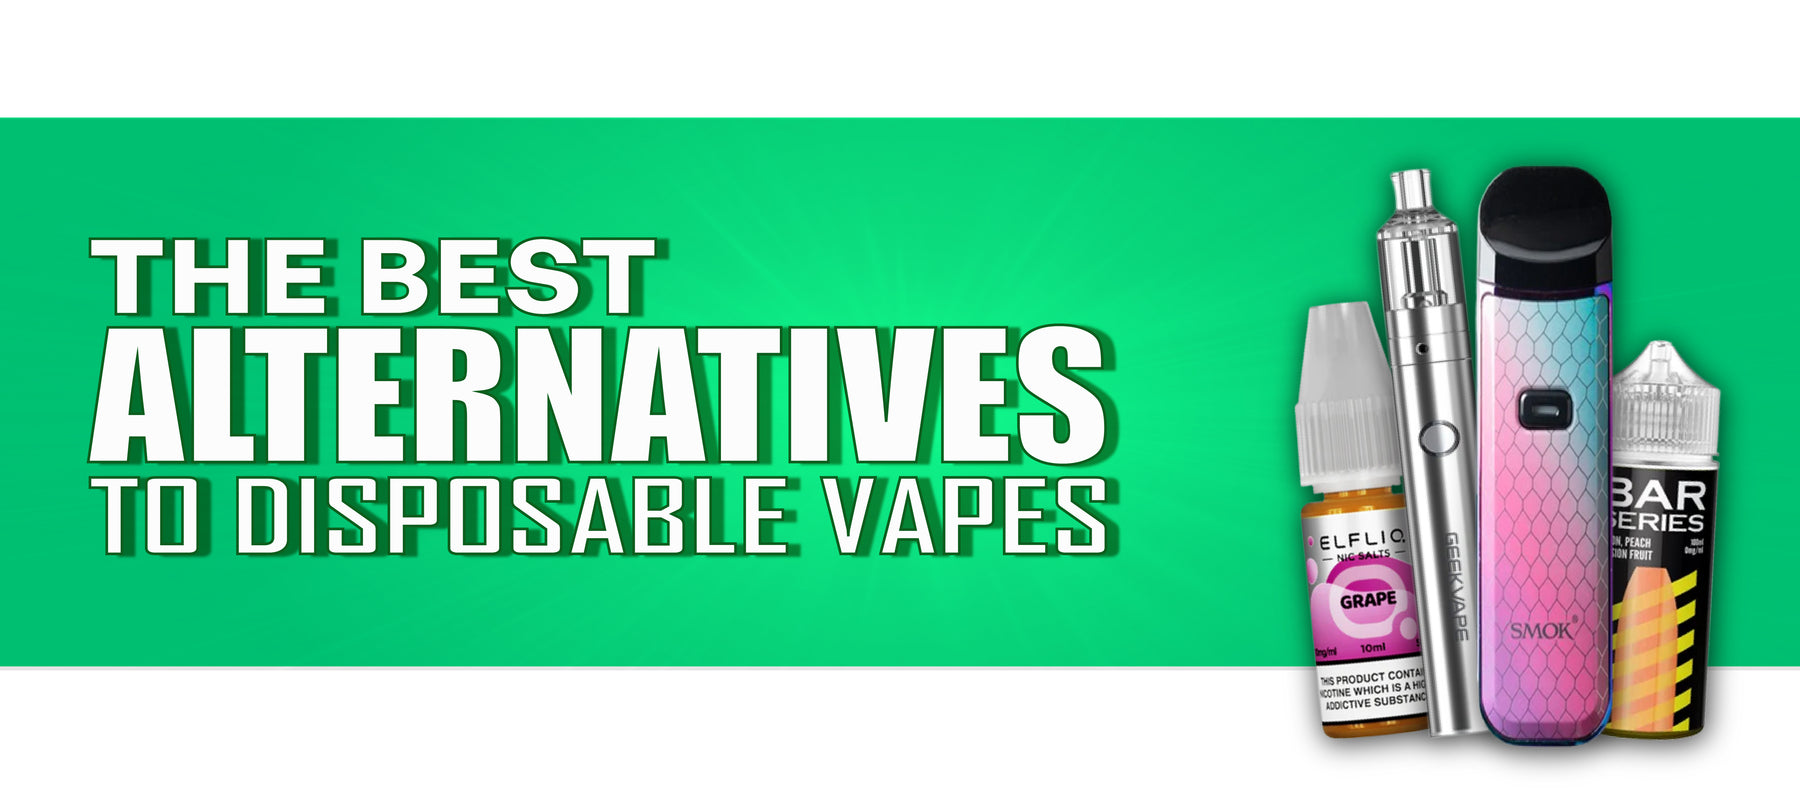 The Best Alternative To Disposable Vapes - Ultimate Guide